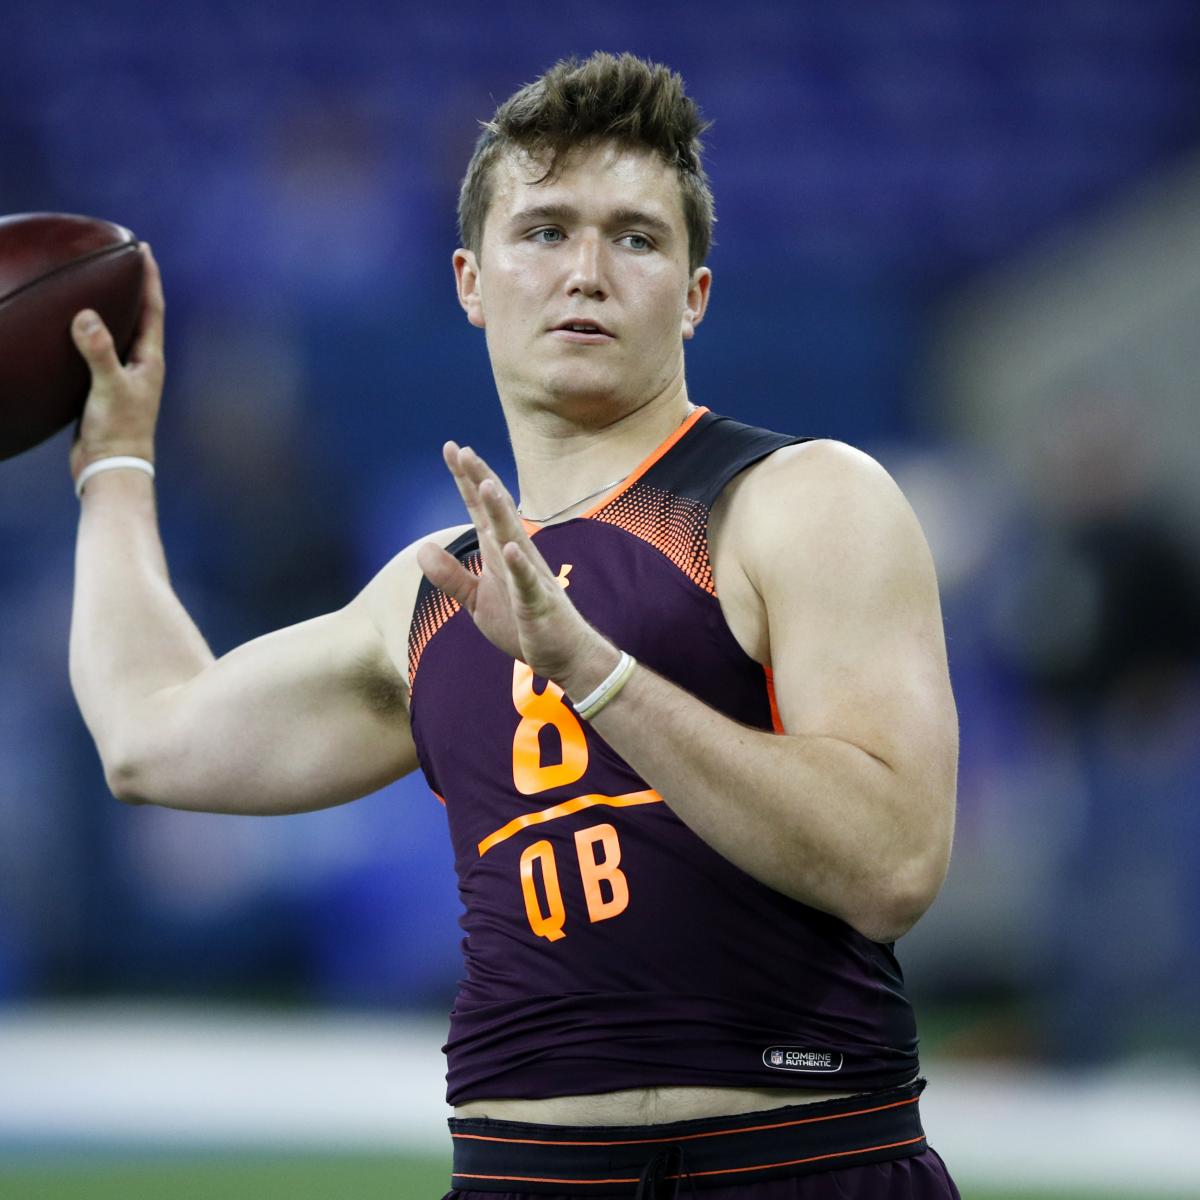 NFL Draft 2019: 1st-Round Order and Prospects Who Can Shake Up Draft